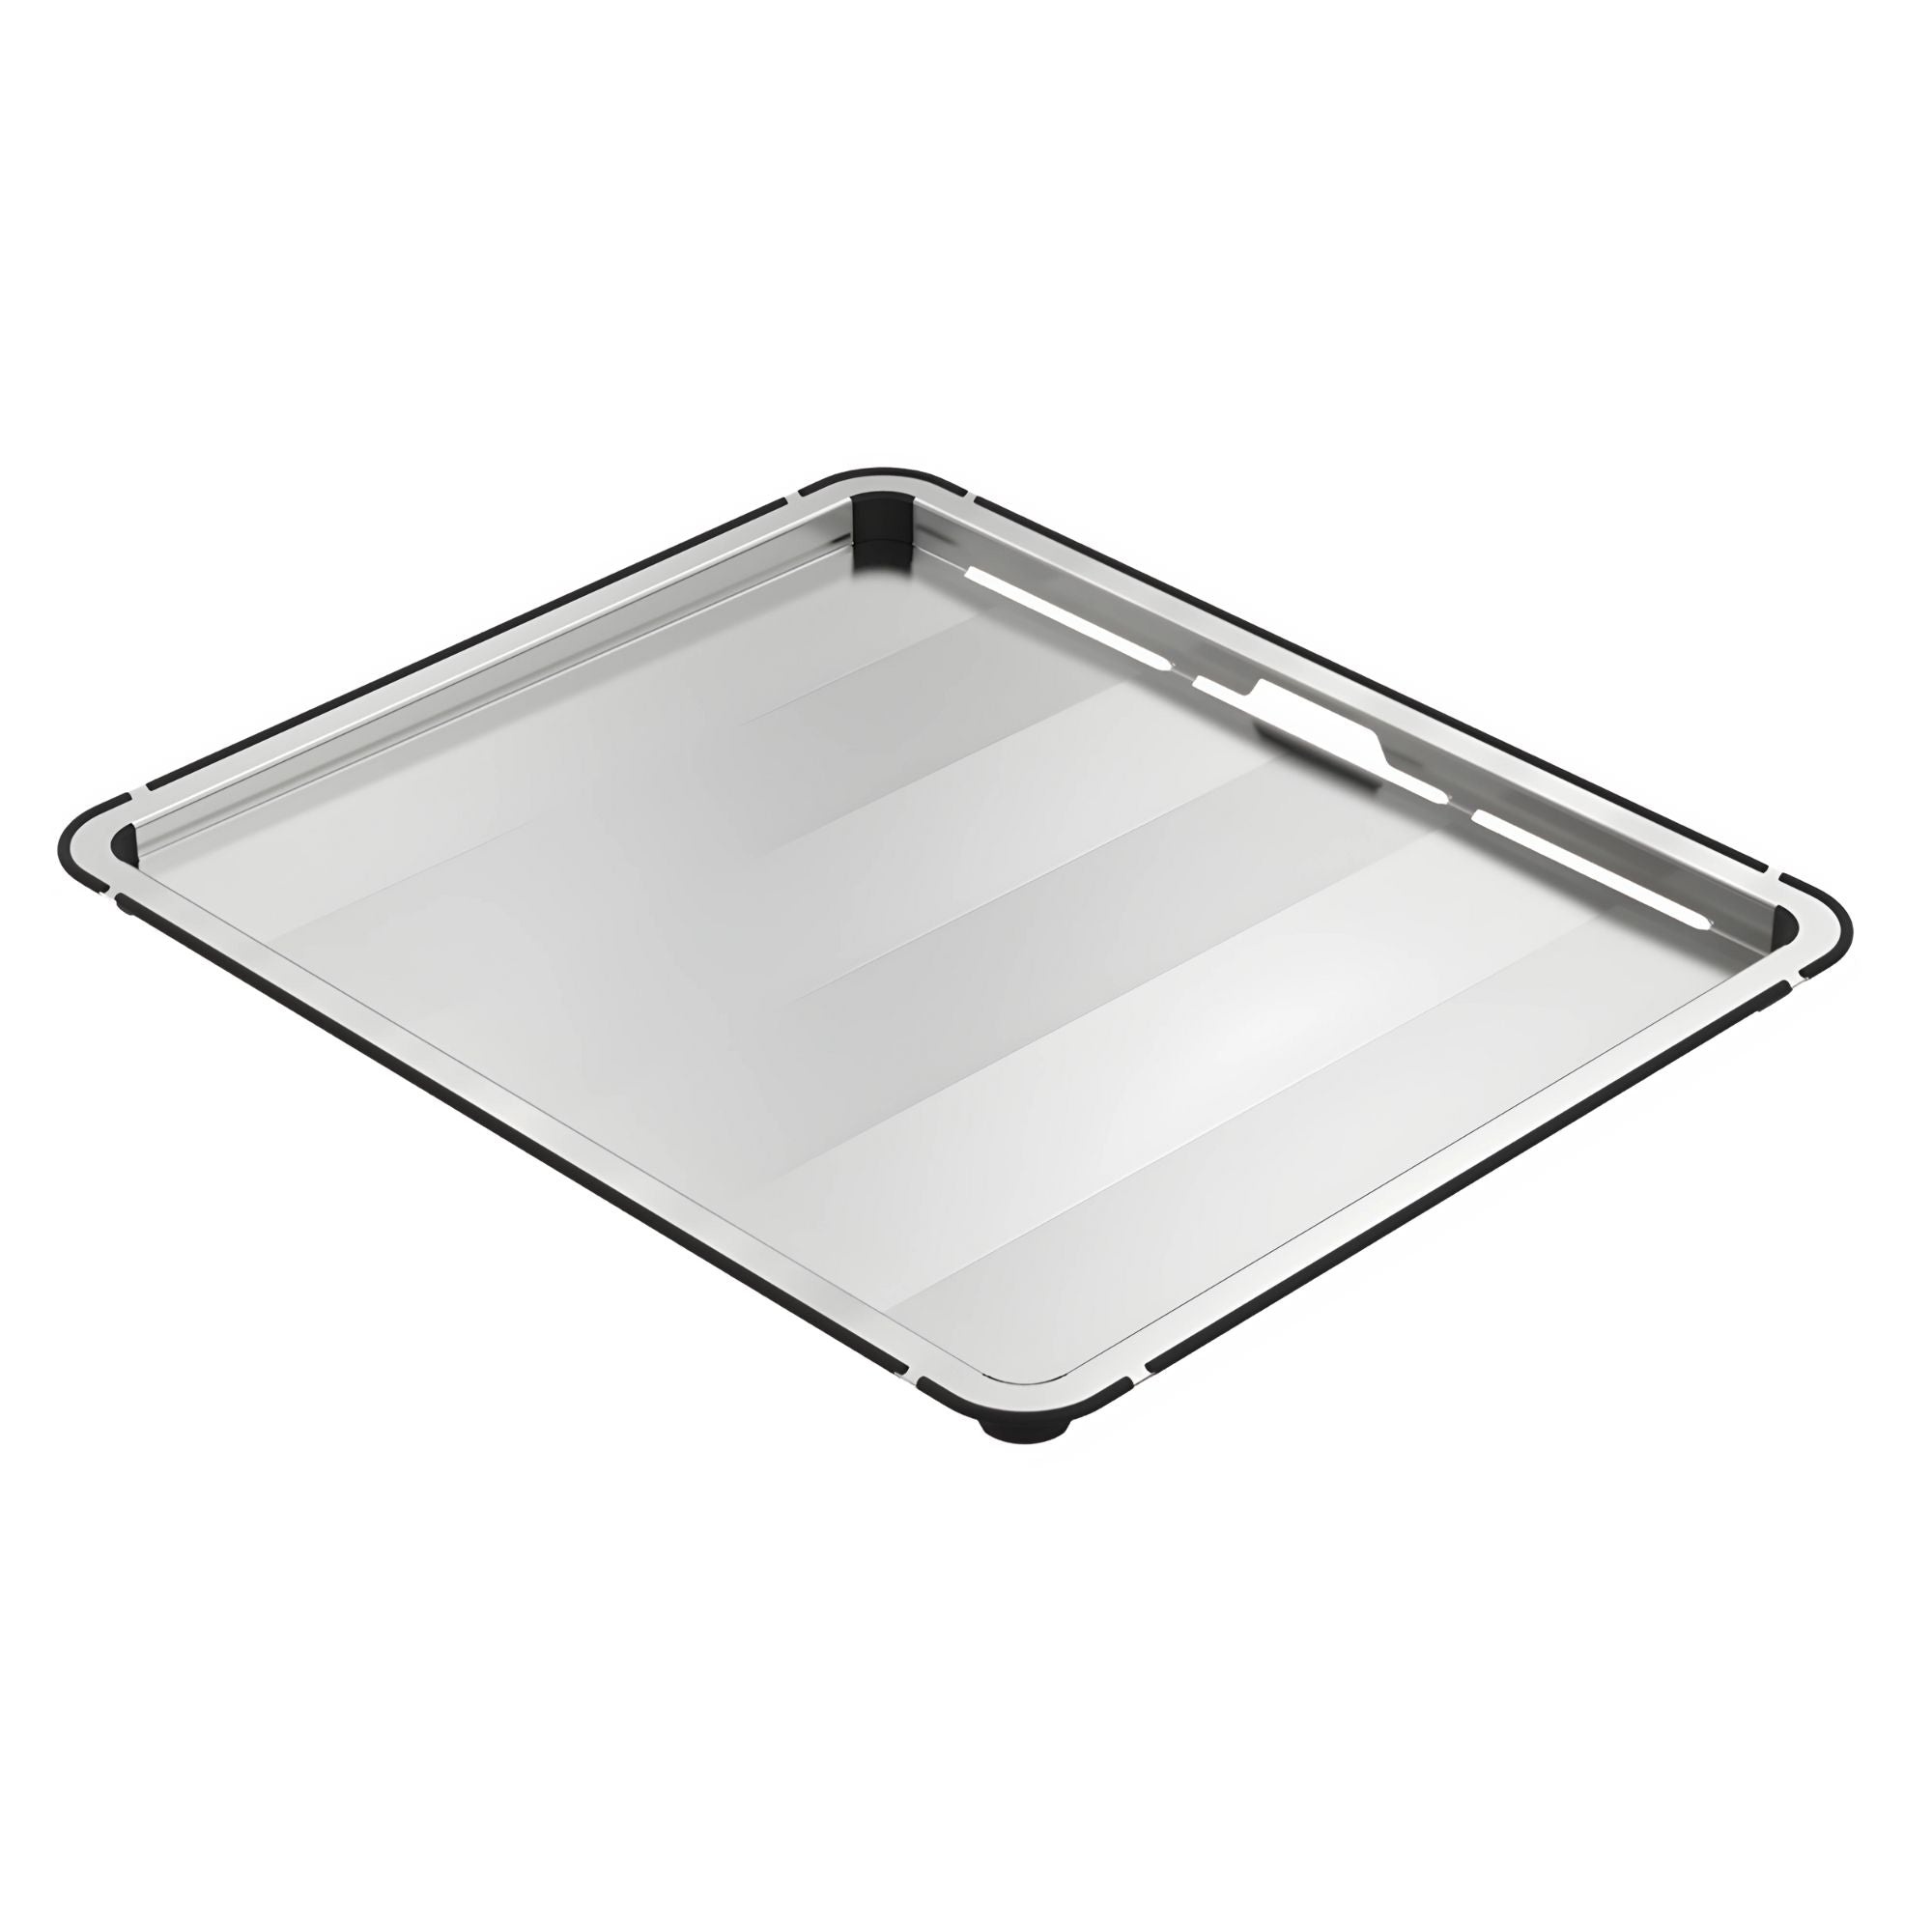 ABEY LUCIA 1 & 1/3 DOUBLE BOWL KITCHEN SINK STAINLESS STEEL 608MM